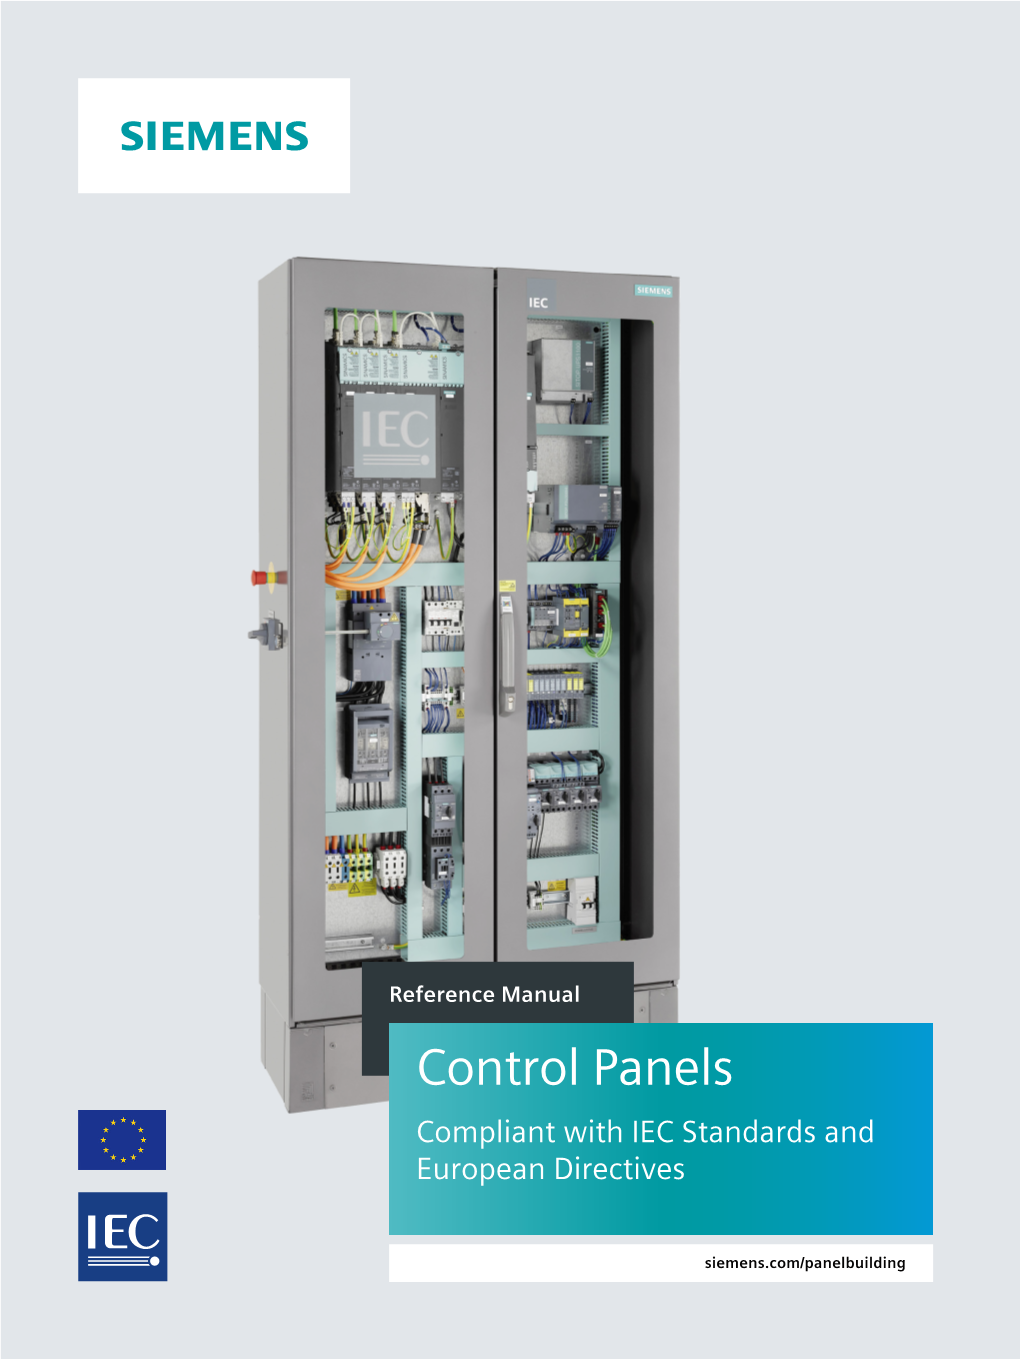 Control Panels Compliant with IEC Standards and European Directives